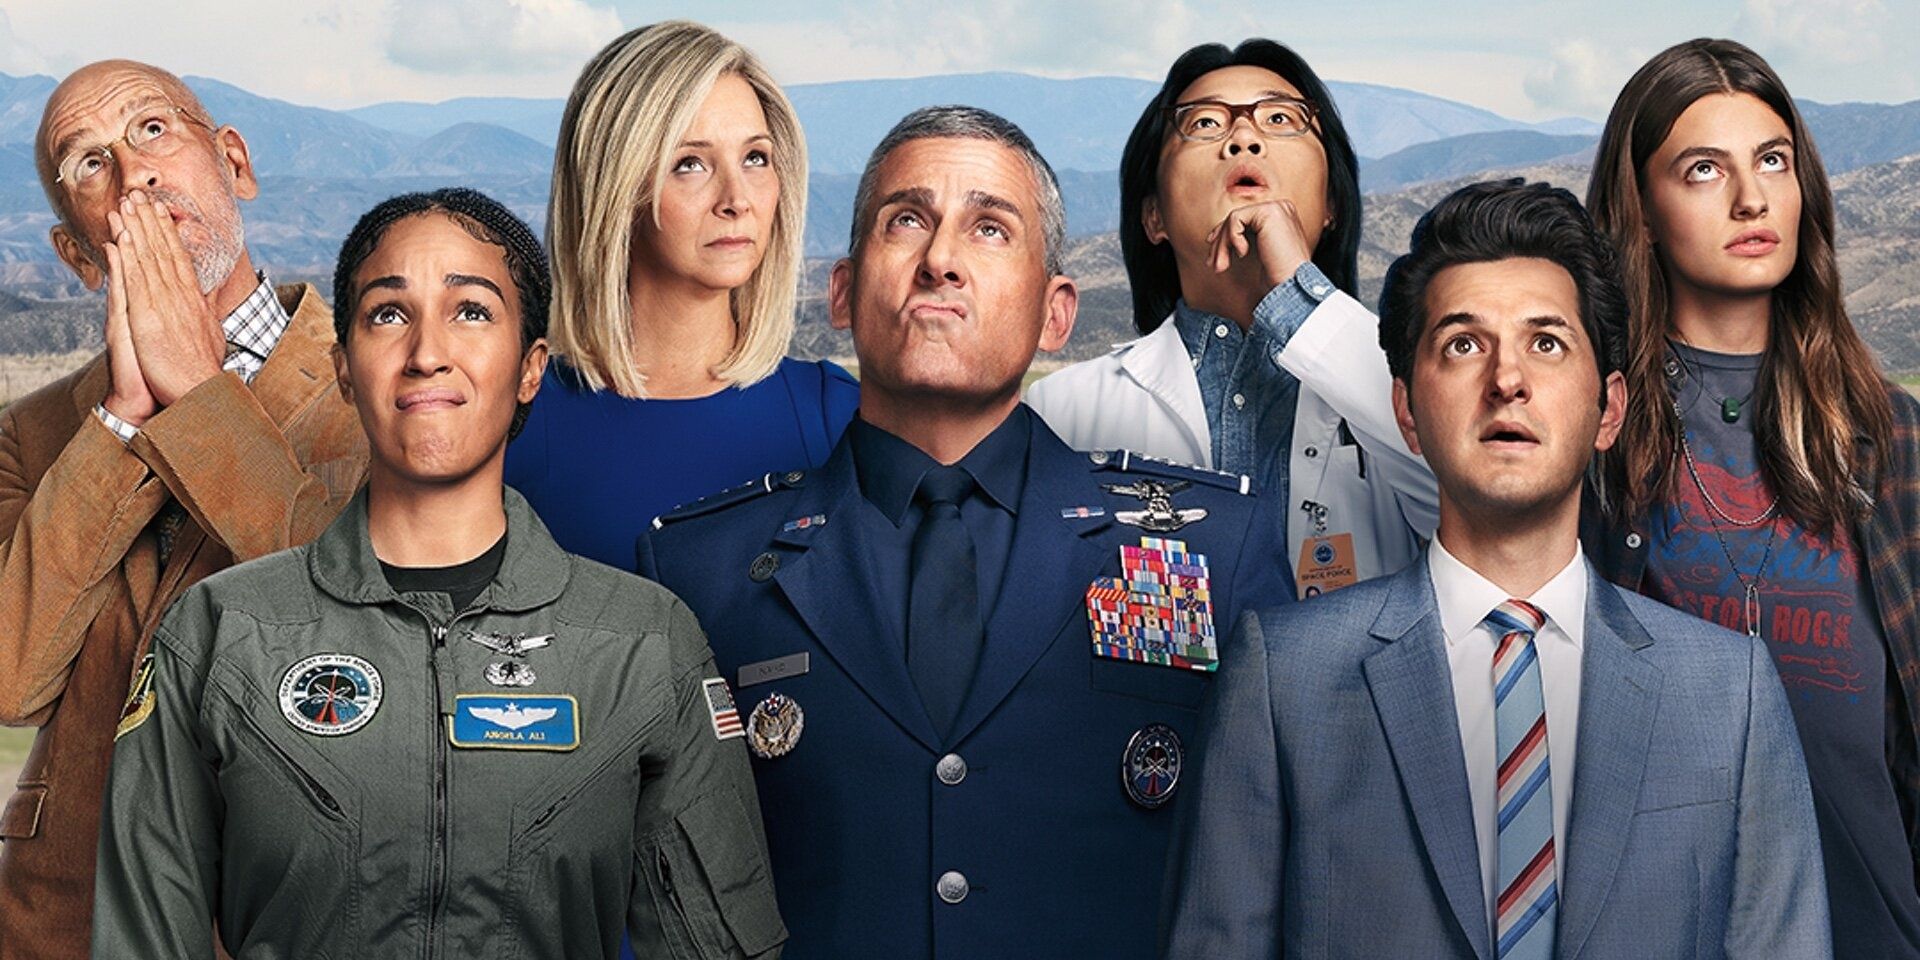 poster for Space Force featuring the cast including Steve Carell, John Malkovich, Ben Schwartz